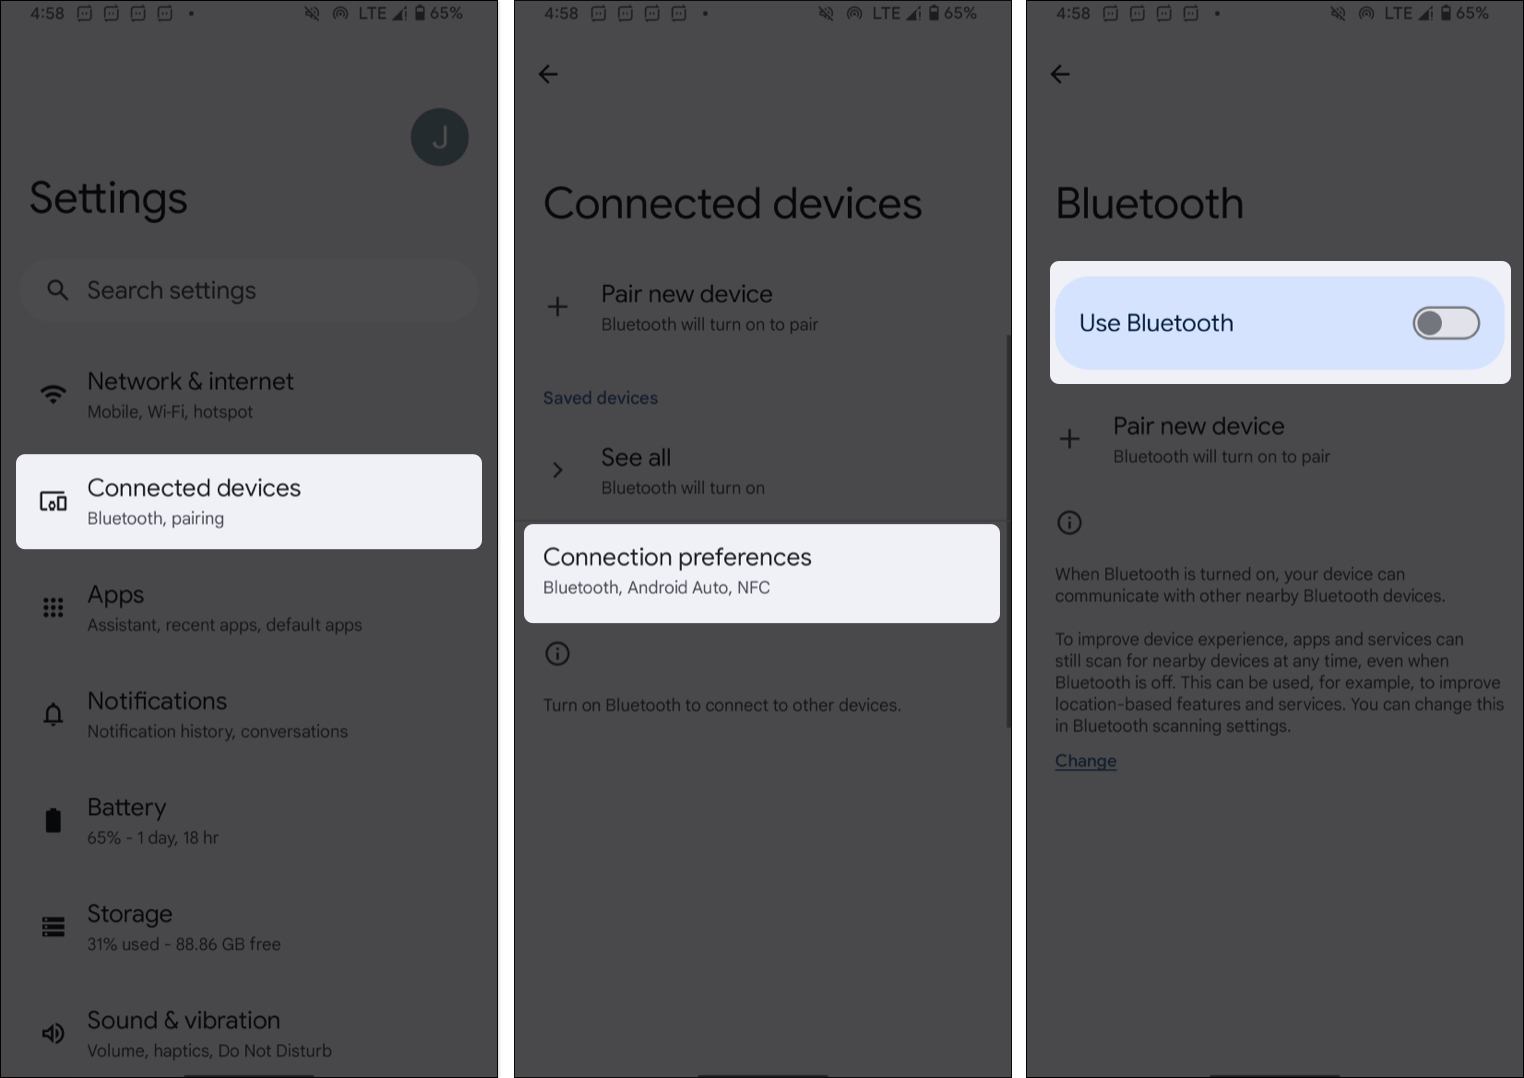 Launch settings, go to connected devices, select Connection preferences, toggle off use bluetooth